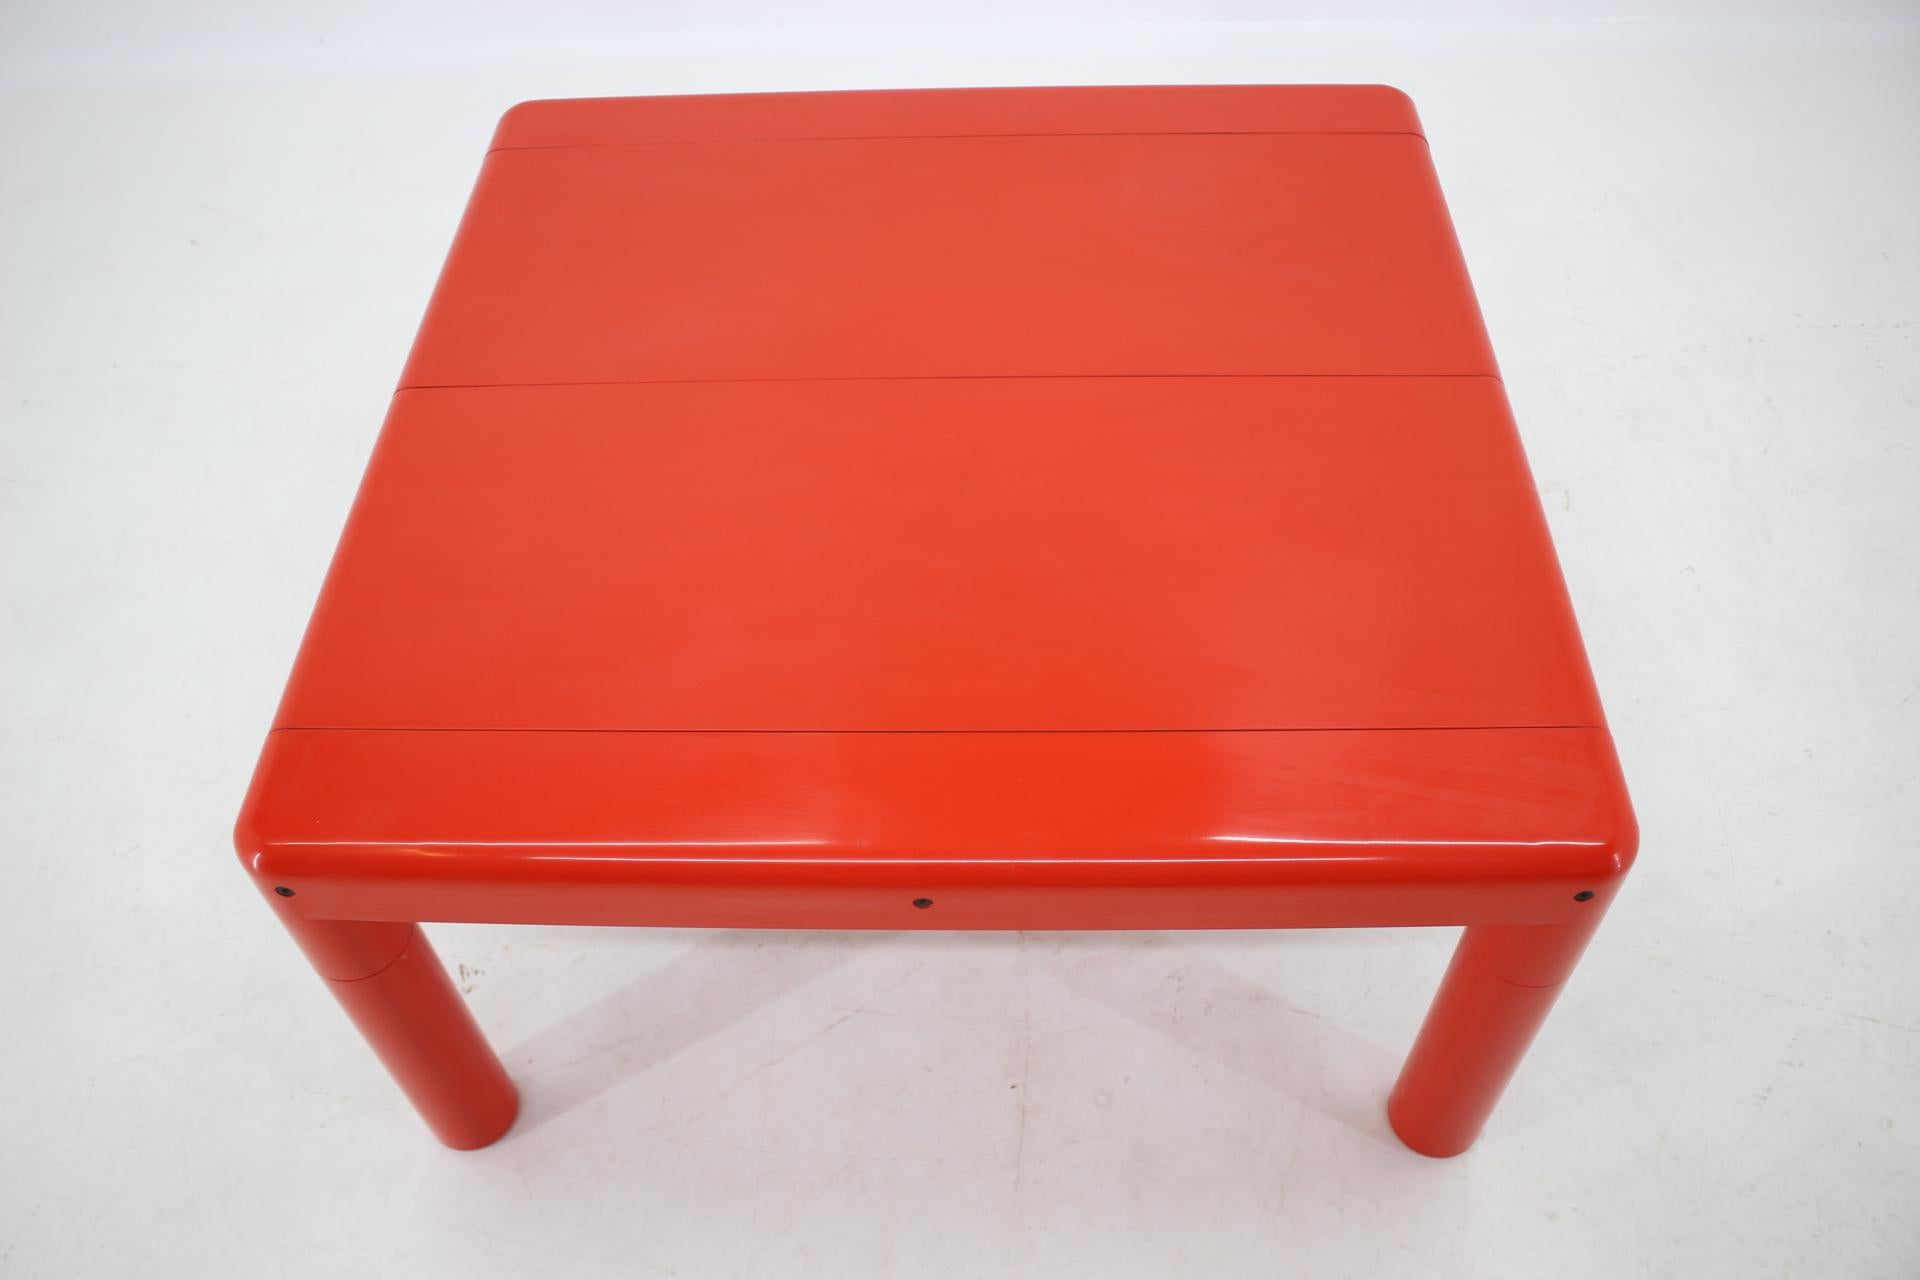 Midcentury Space Age Coffee Table UPO, Eero Aarnio, Finland, 1970s In Good Condition For Sale In Praha, CZ